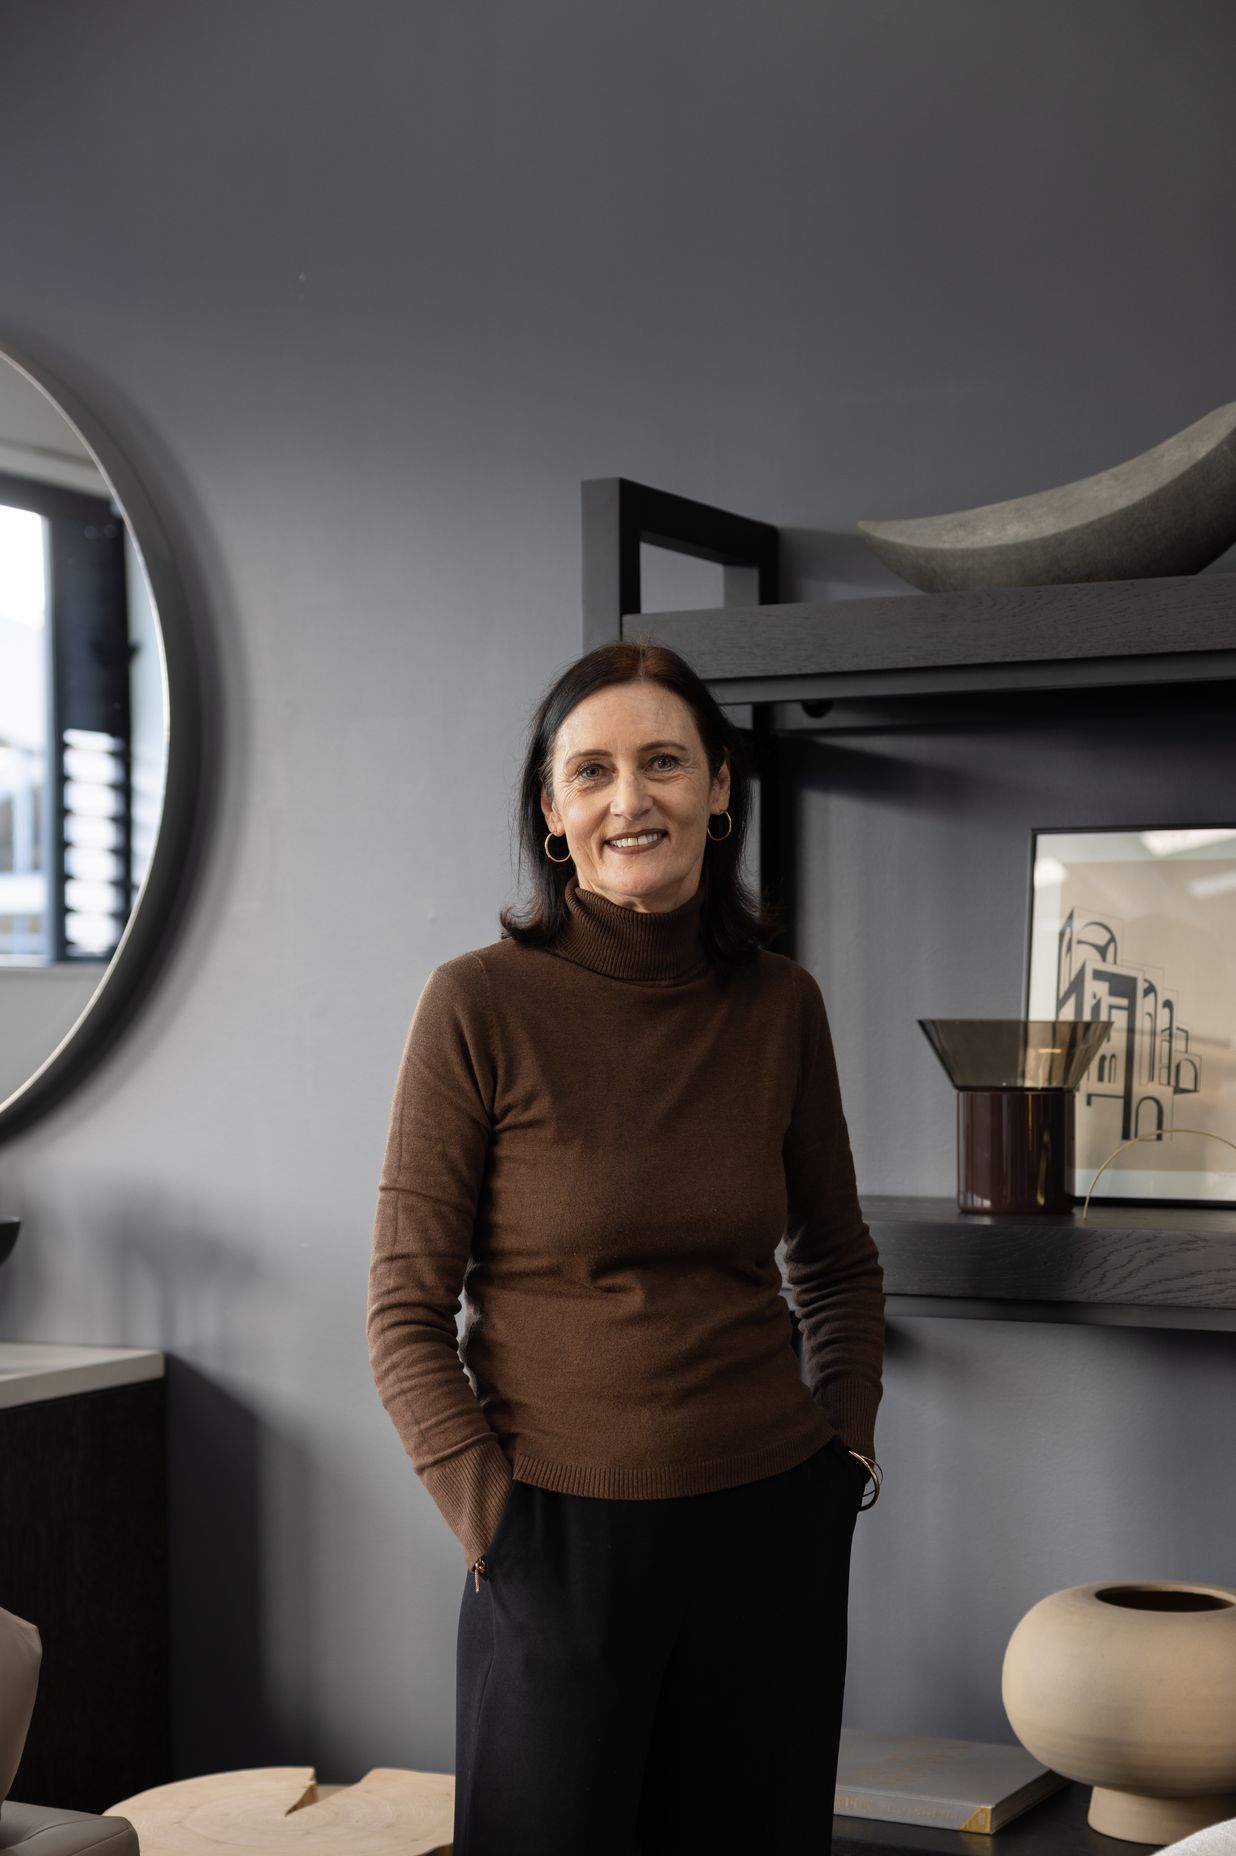 Jennifer Keenan, Frobisher's Auckland showroom manager and interiors expert.